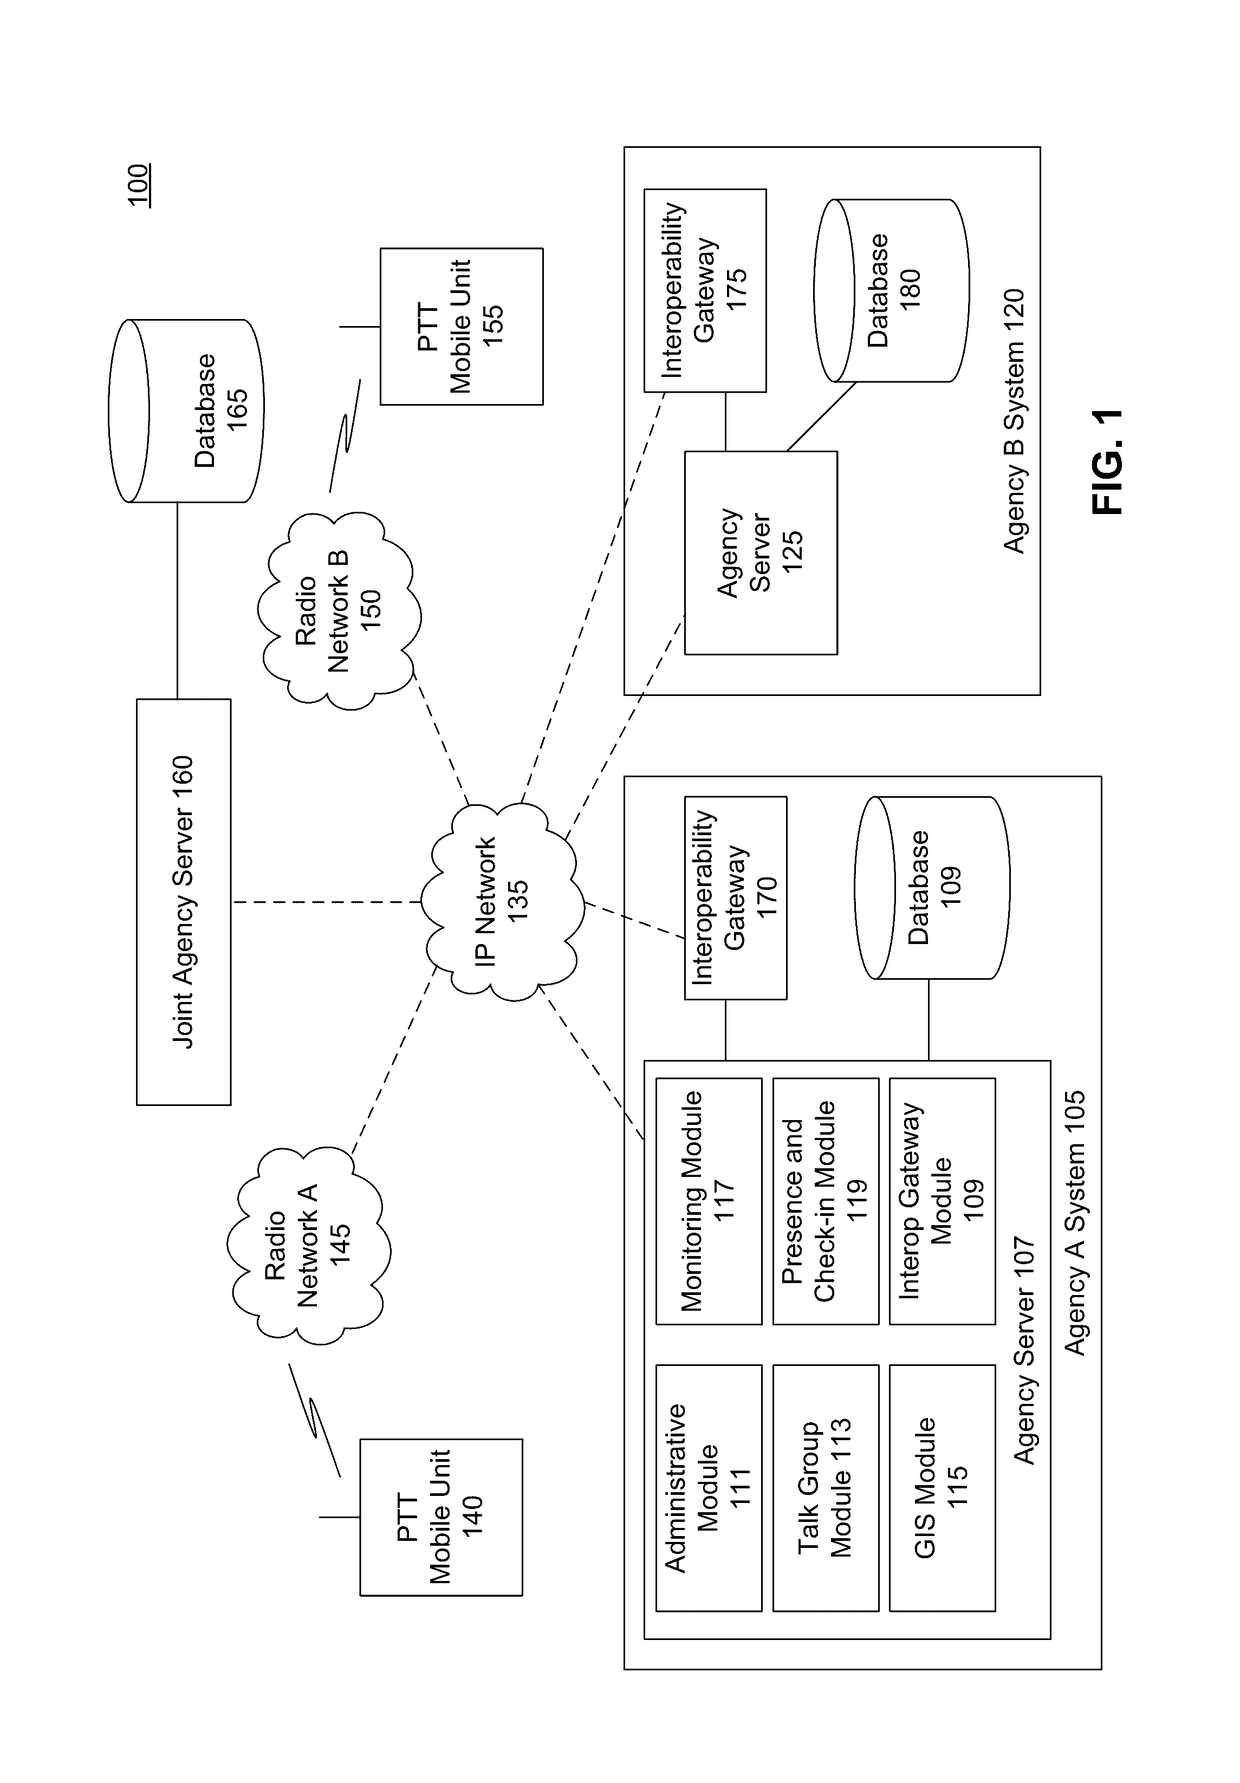 Intelligent formation and management of dynamic talk groups